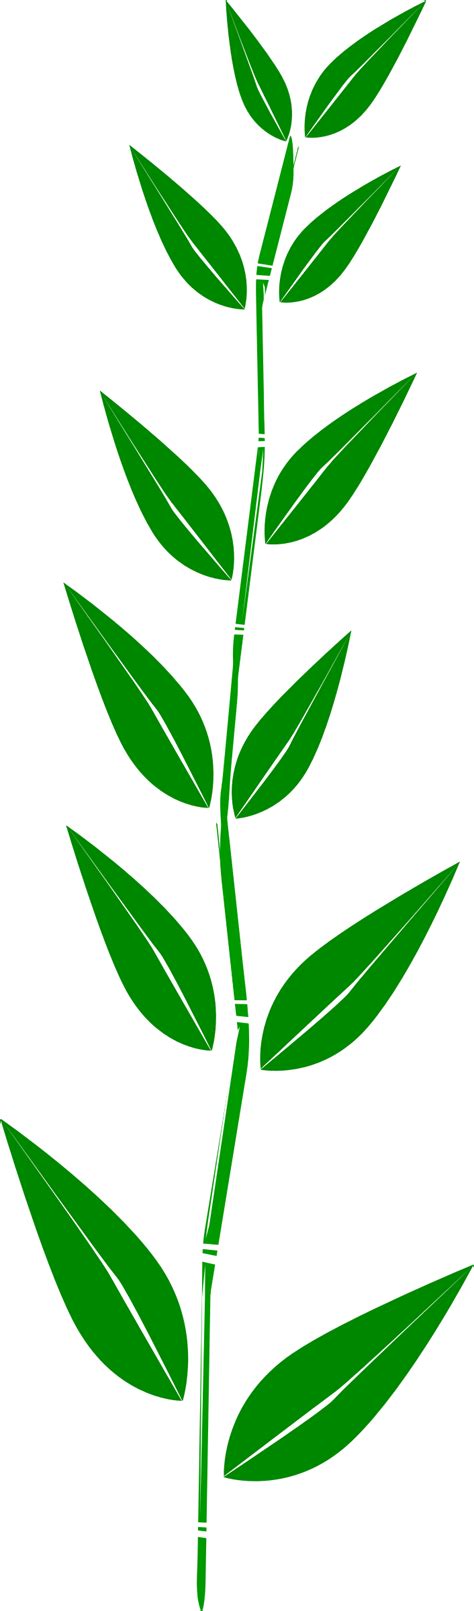 Bamboo Clipart Bamboo Leaf Bamboo Bamboo Leaf Transparent Free For